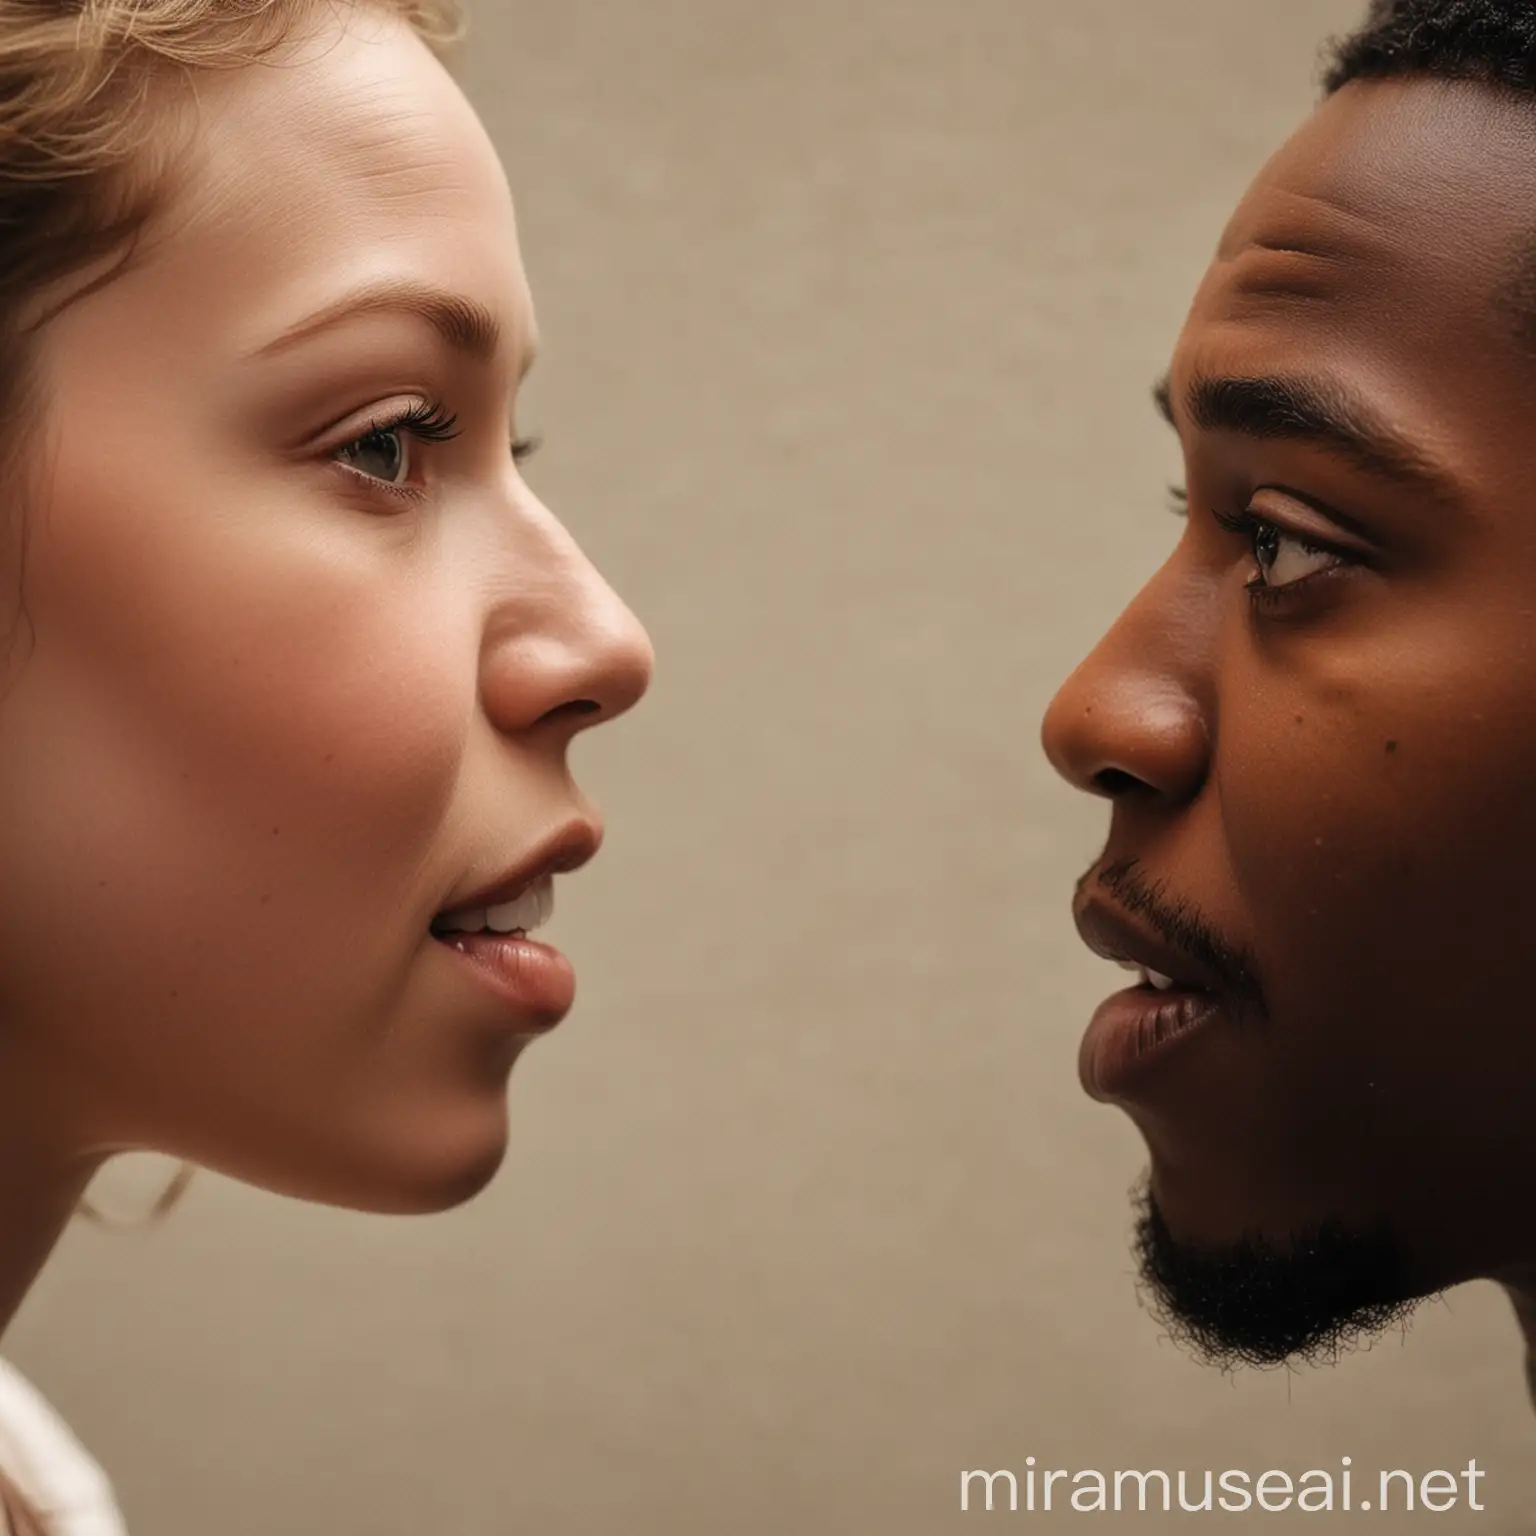 A white person and a black person having a conversation in close up
